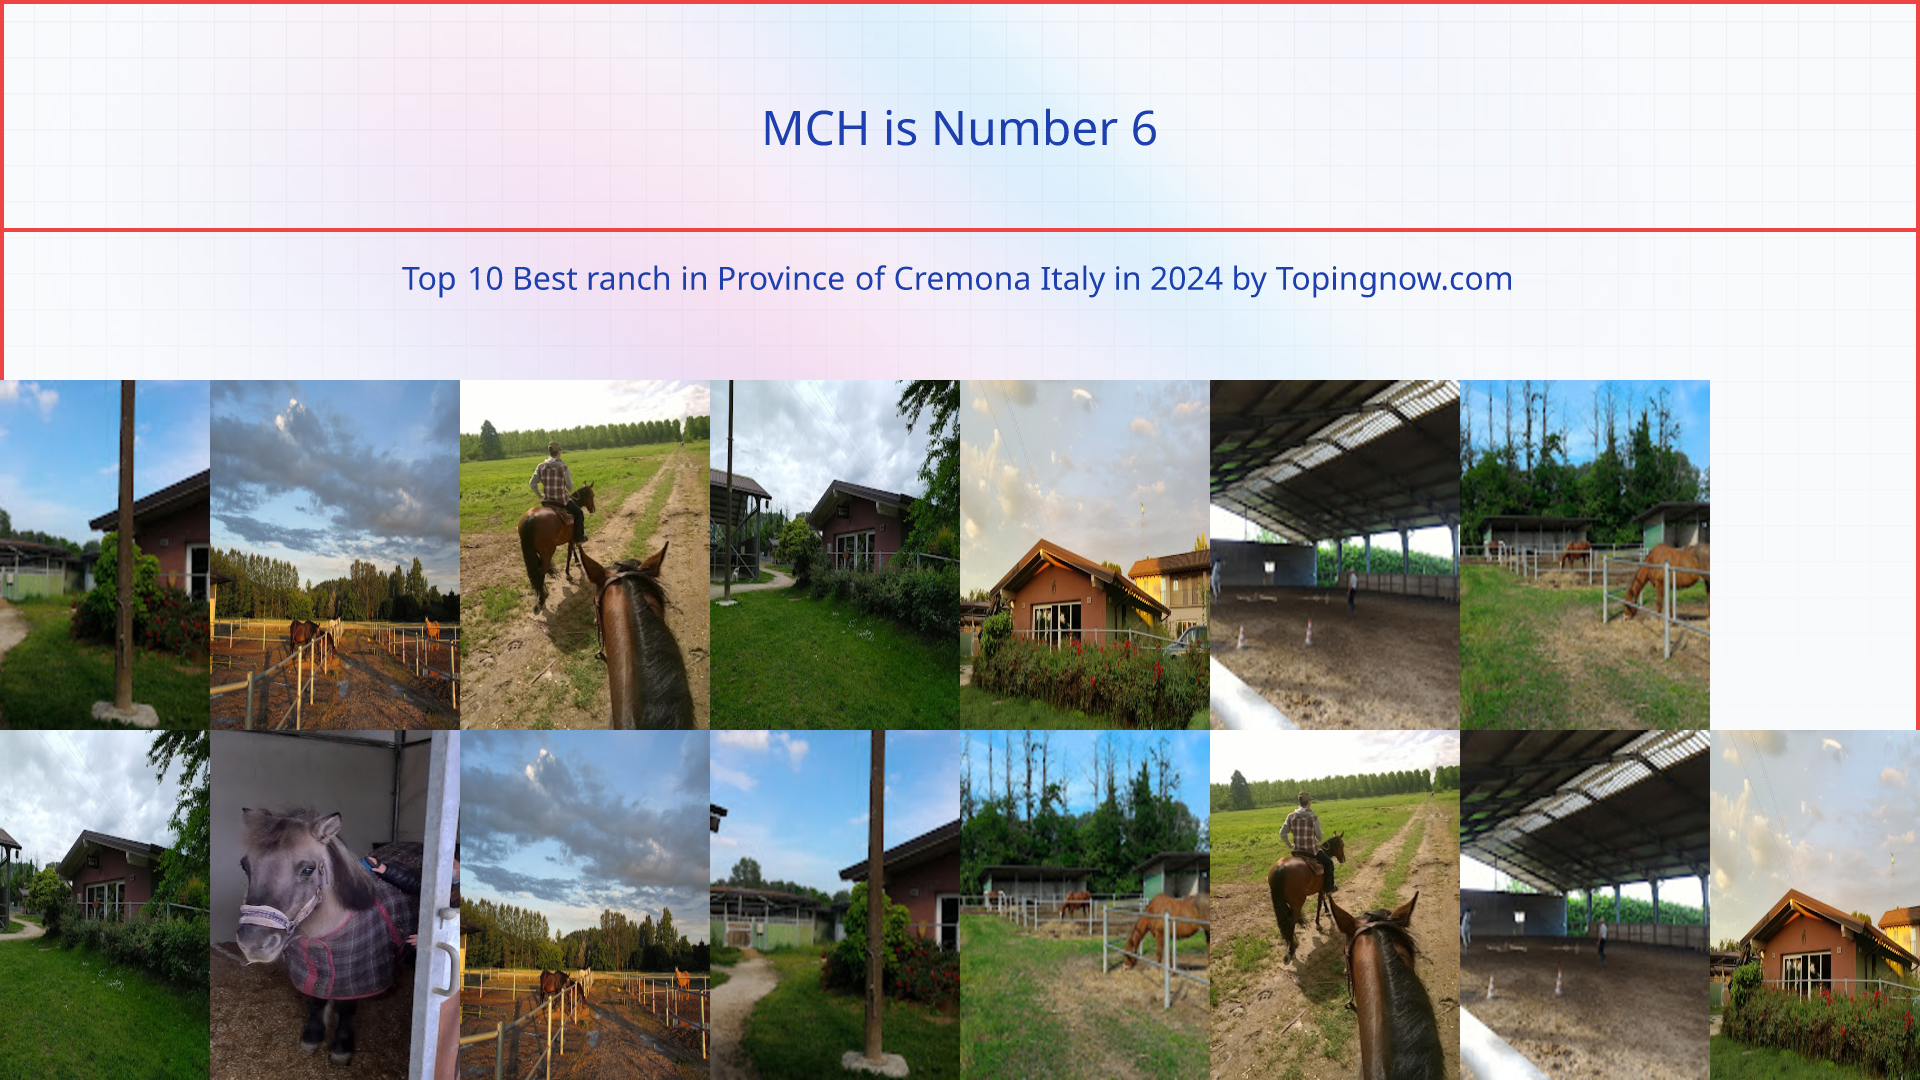 MCH: Top 10 Best ranch in Province of Cremona Italy in 2024